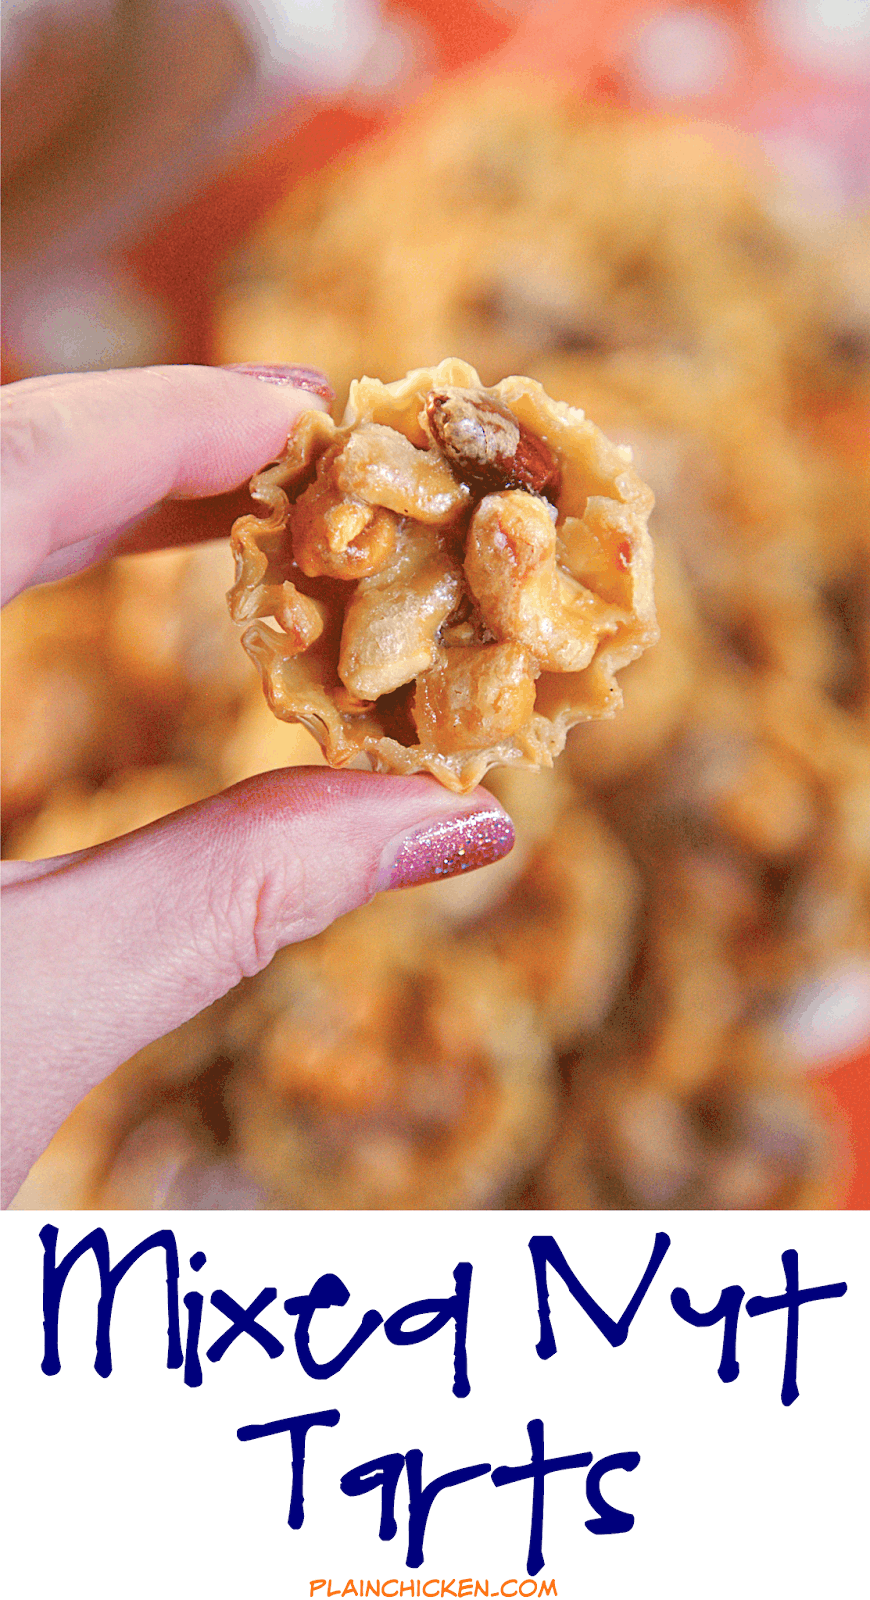 Mixed Nut Tarts - honey roasted mixed nuts tossed in a homemade caramel sauce and baked in mini phyllo shells. Ready in 15 minutes! Great for parties and your holiday table! Double the recipe - they were gone in a flash!! Can make up to 2 days in advance.